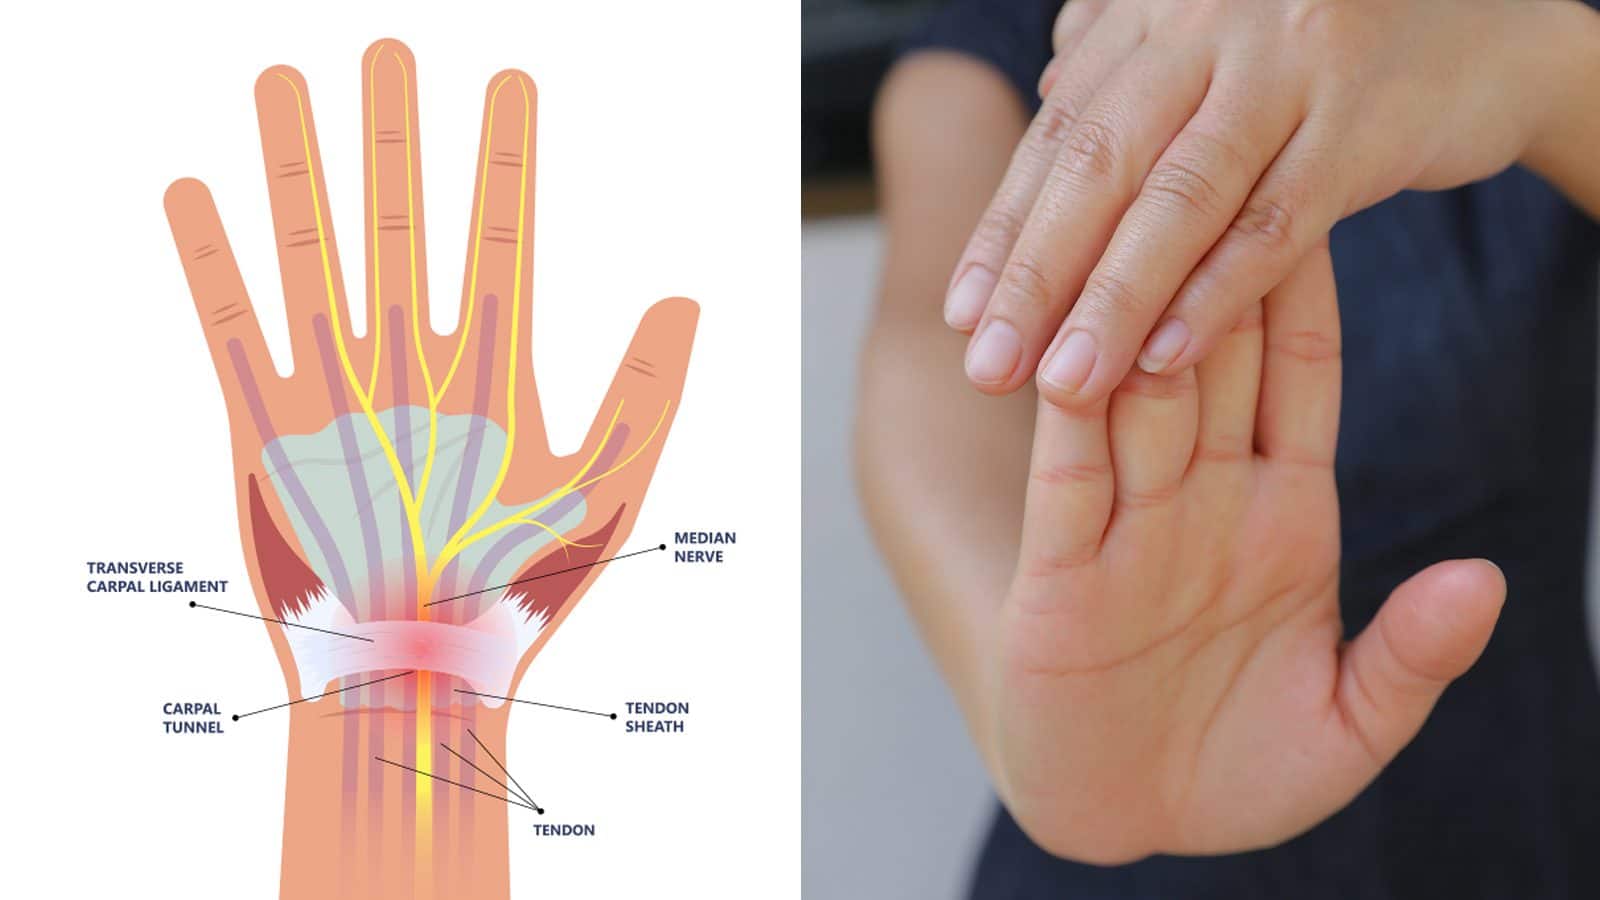 7 Exercises for Carpal Tunnel Syndrome to Do at Home